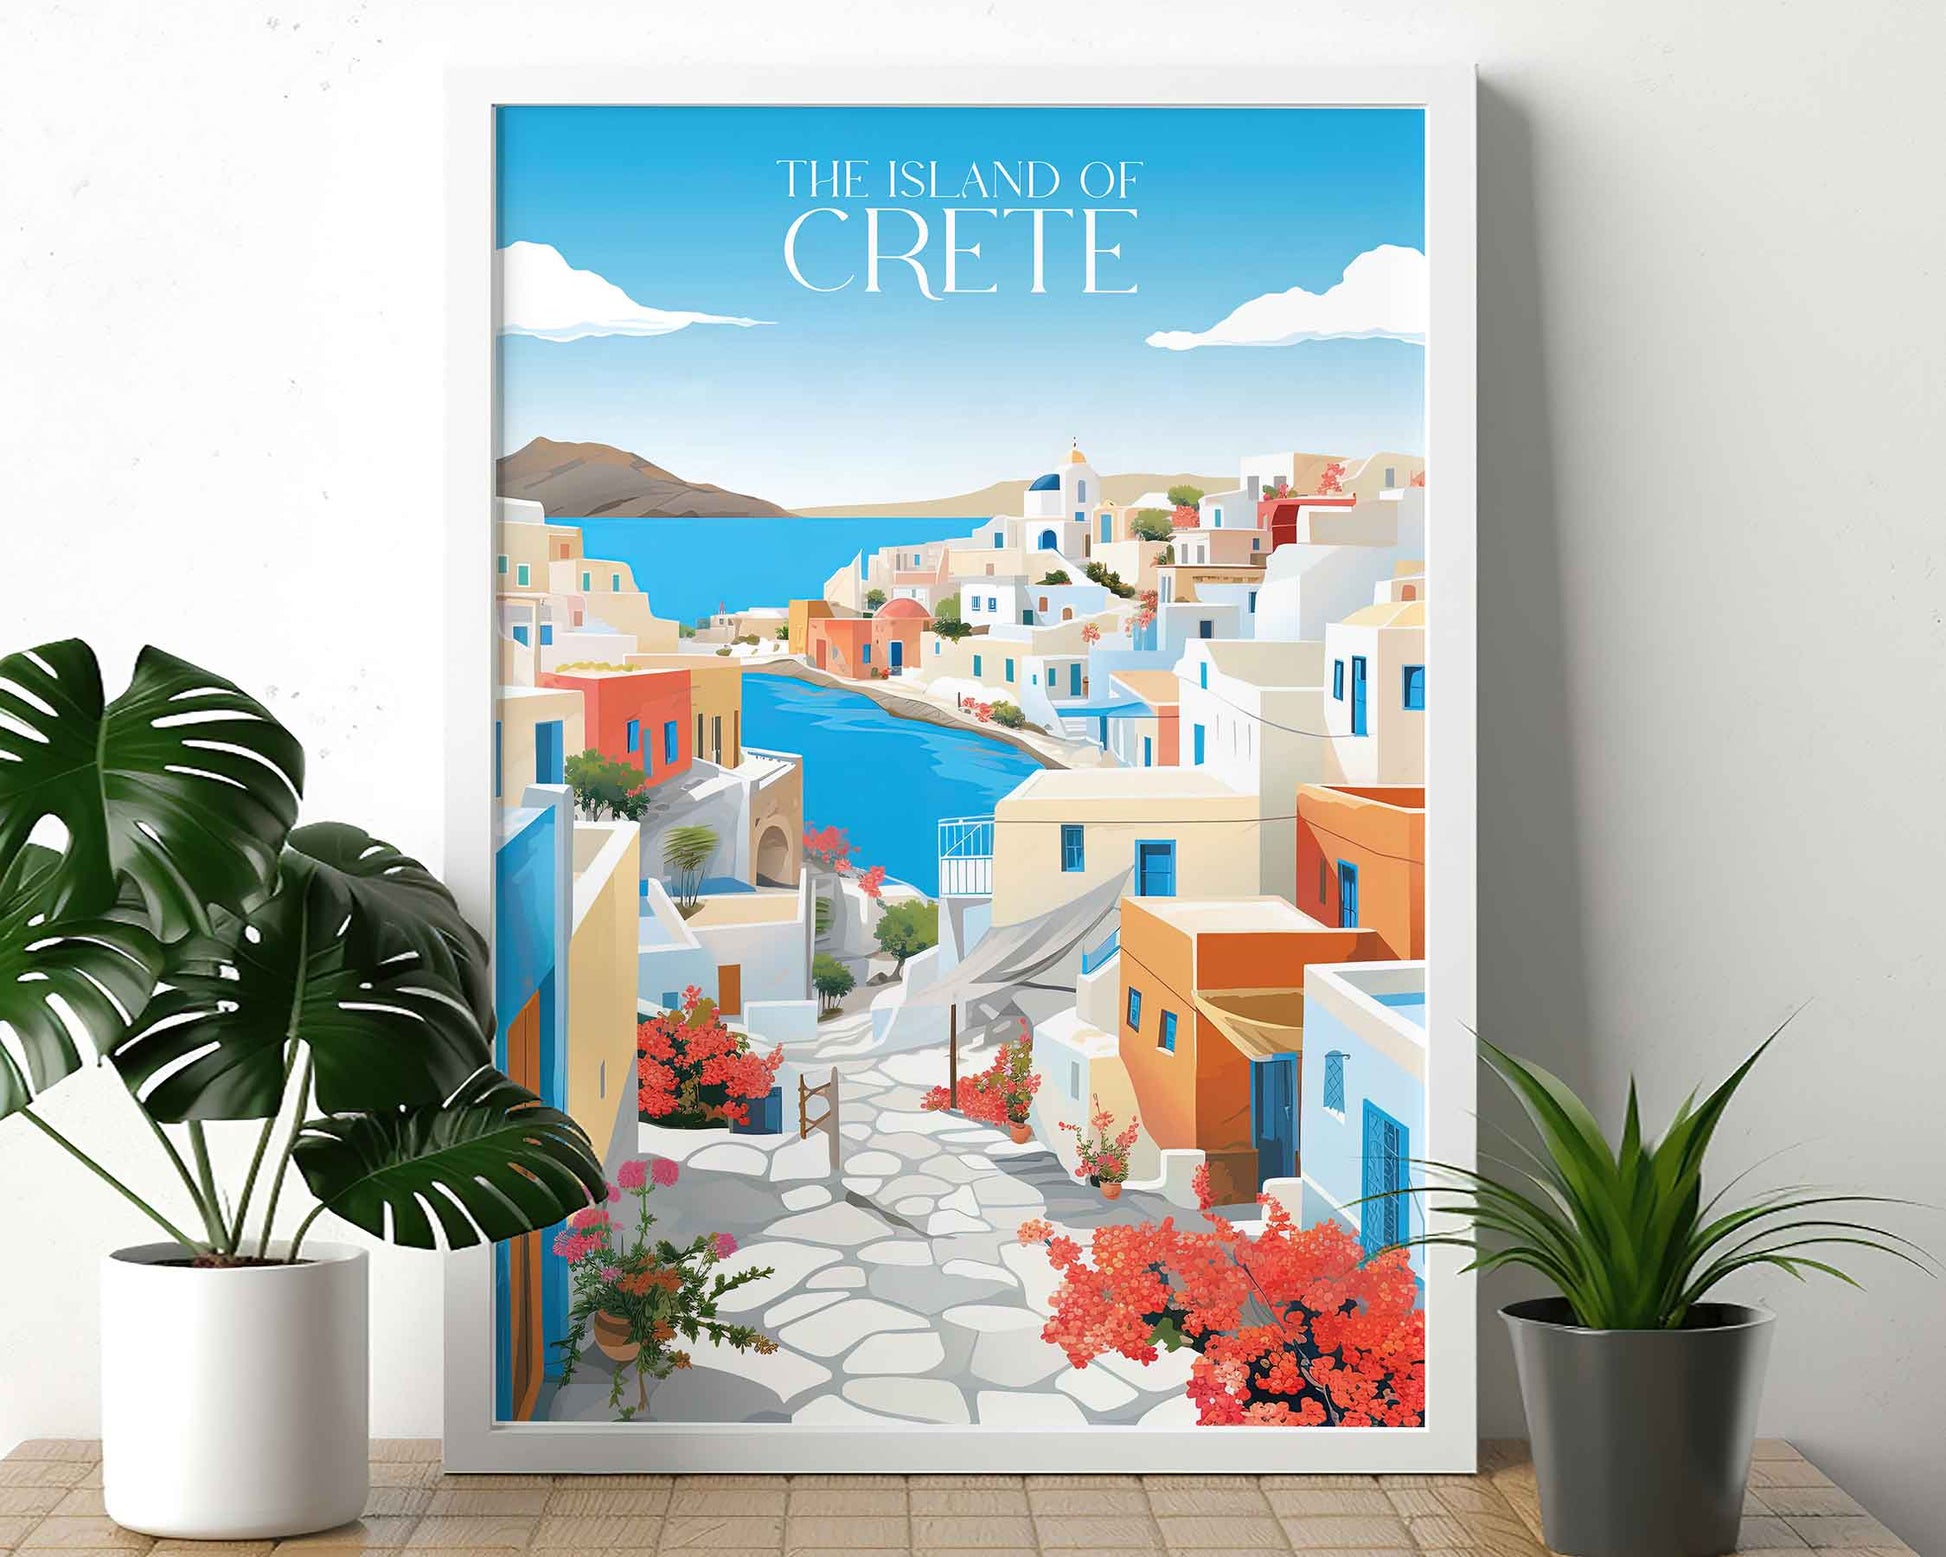 Framed Image of Island of Crete, Greece Travel Poster Print Wall Art